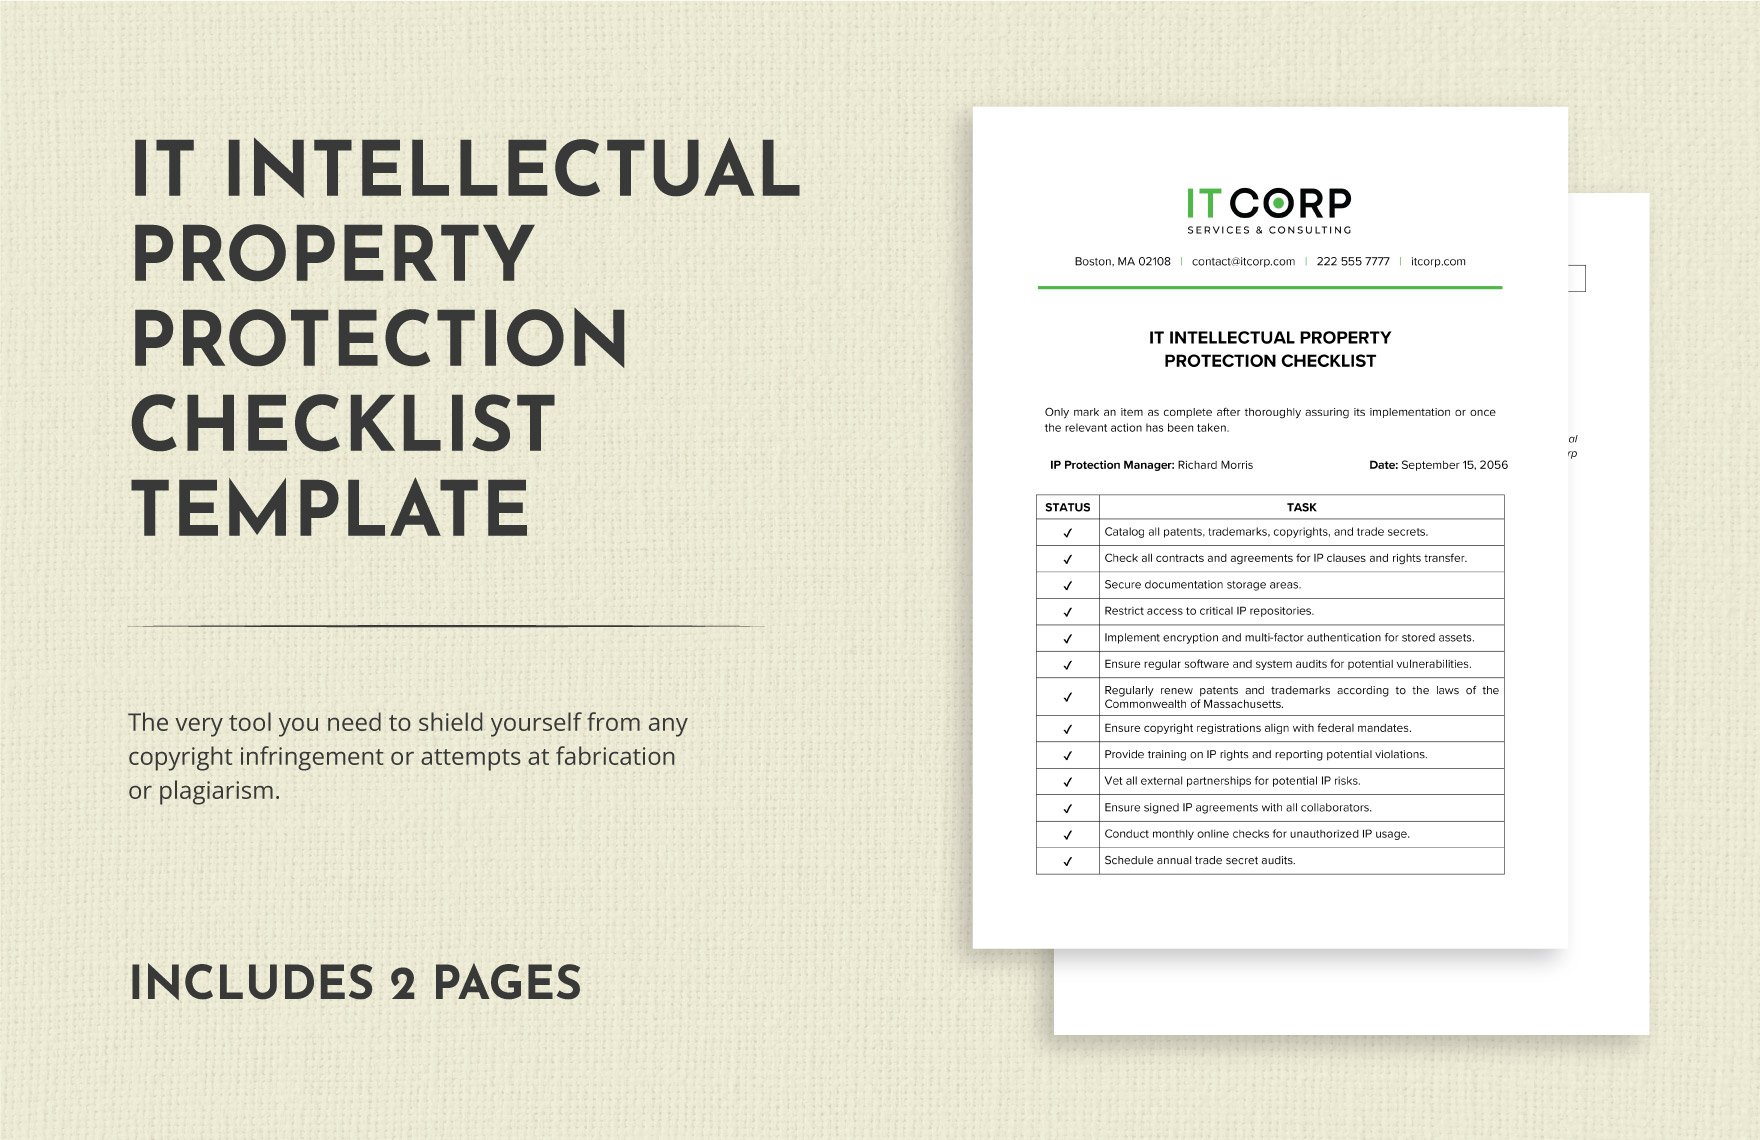 IT Intellectual Property Protection Checklist Template in Word, Google Docs, PDF